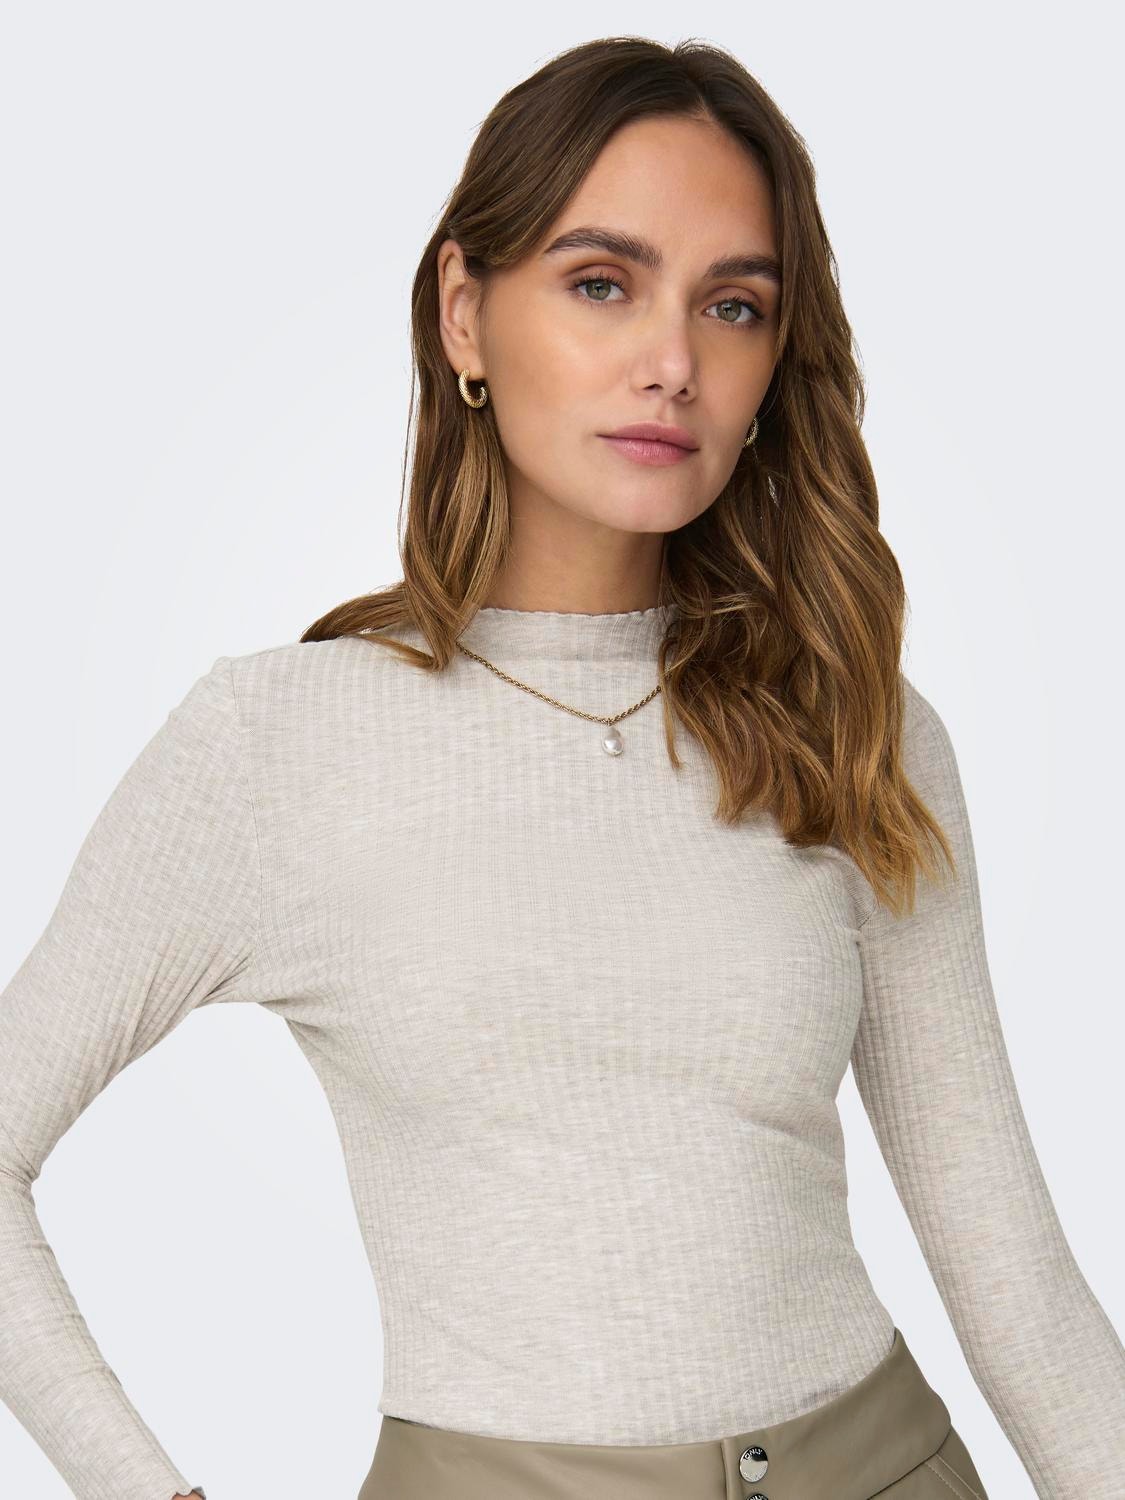 ONLY Comfort Fit High neck Top -Pumice Stone - 15180040